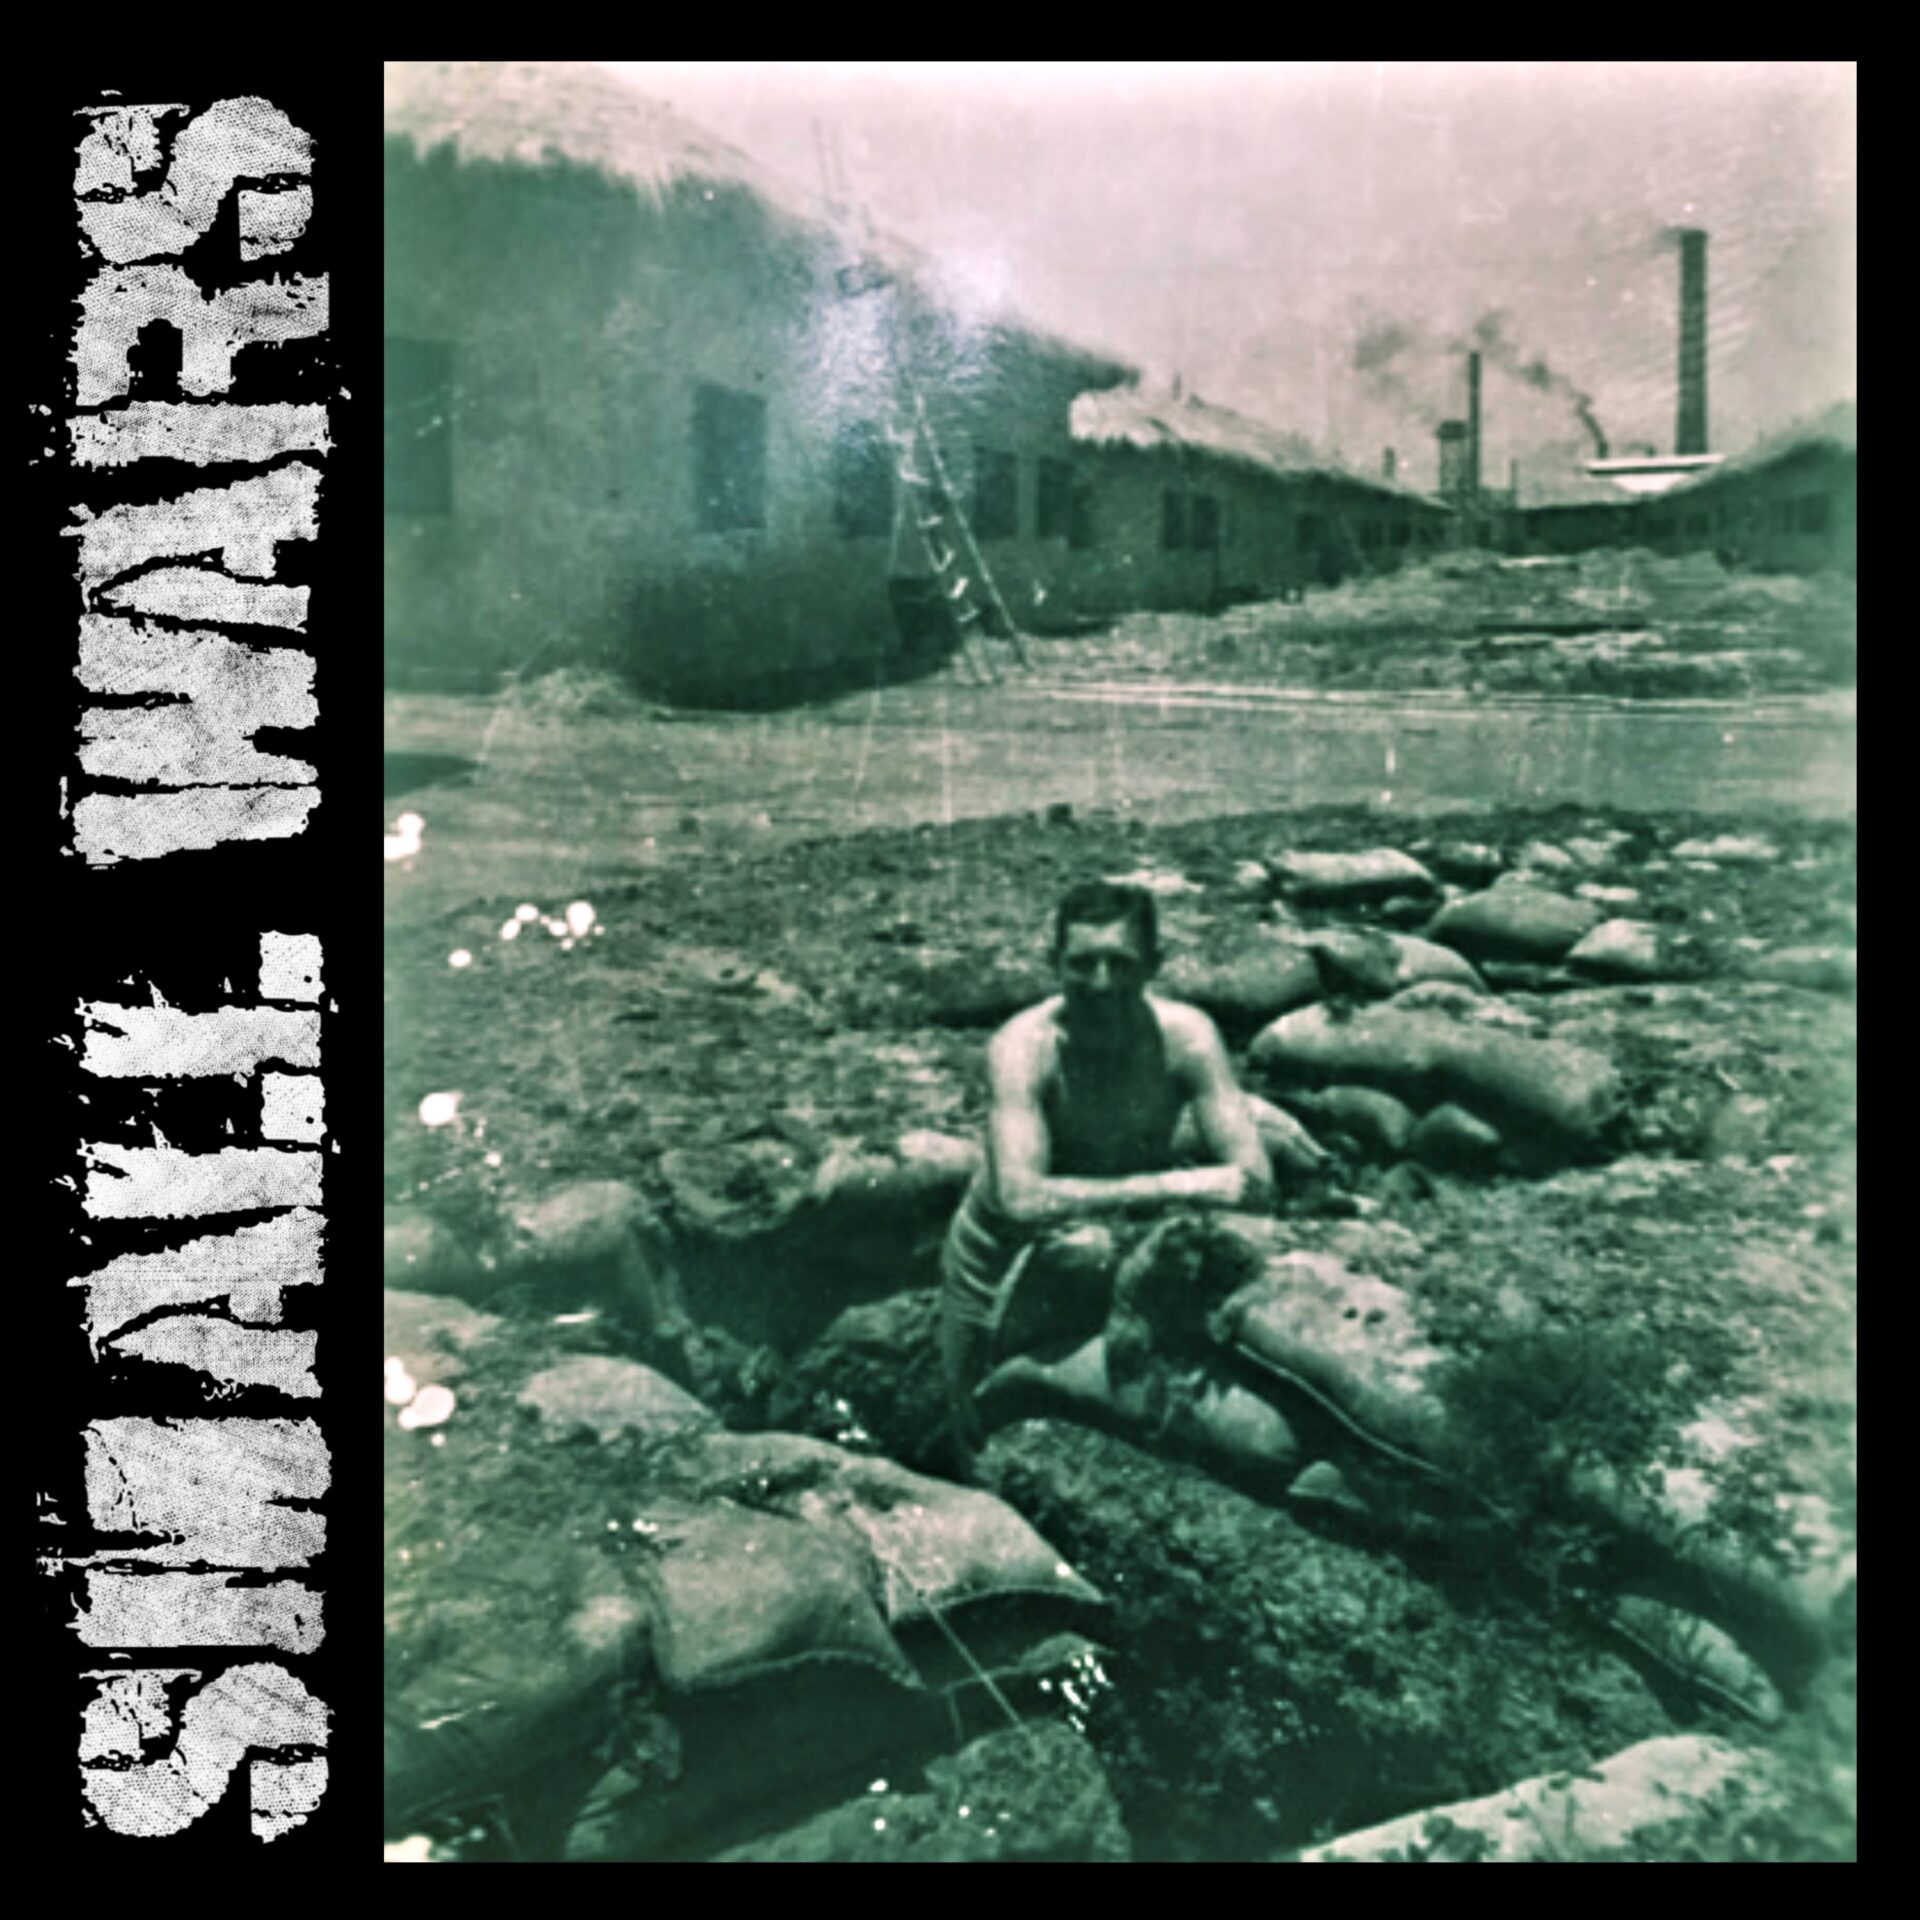 PREMIERE: Small Wars self-titled EP is political punk at its best